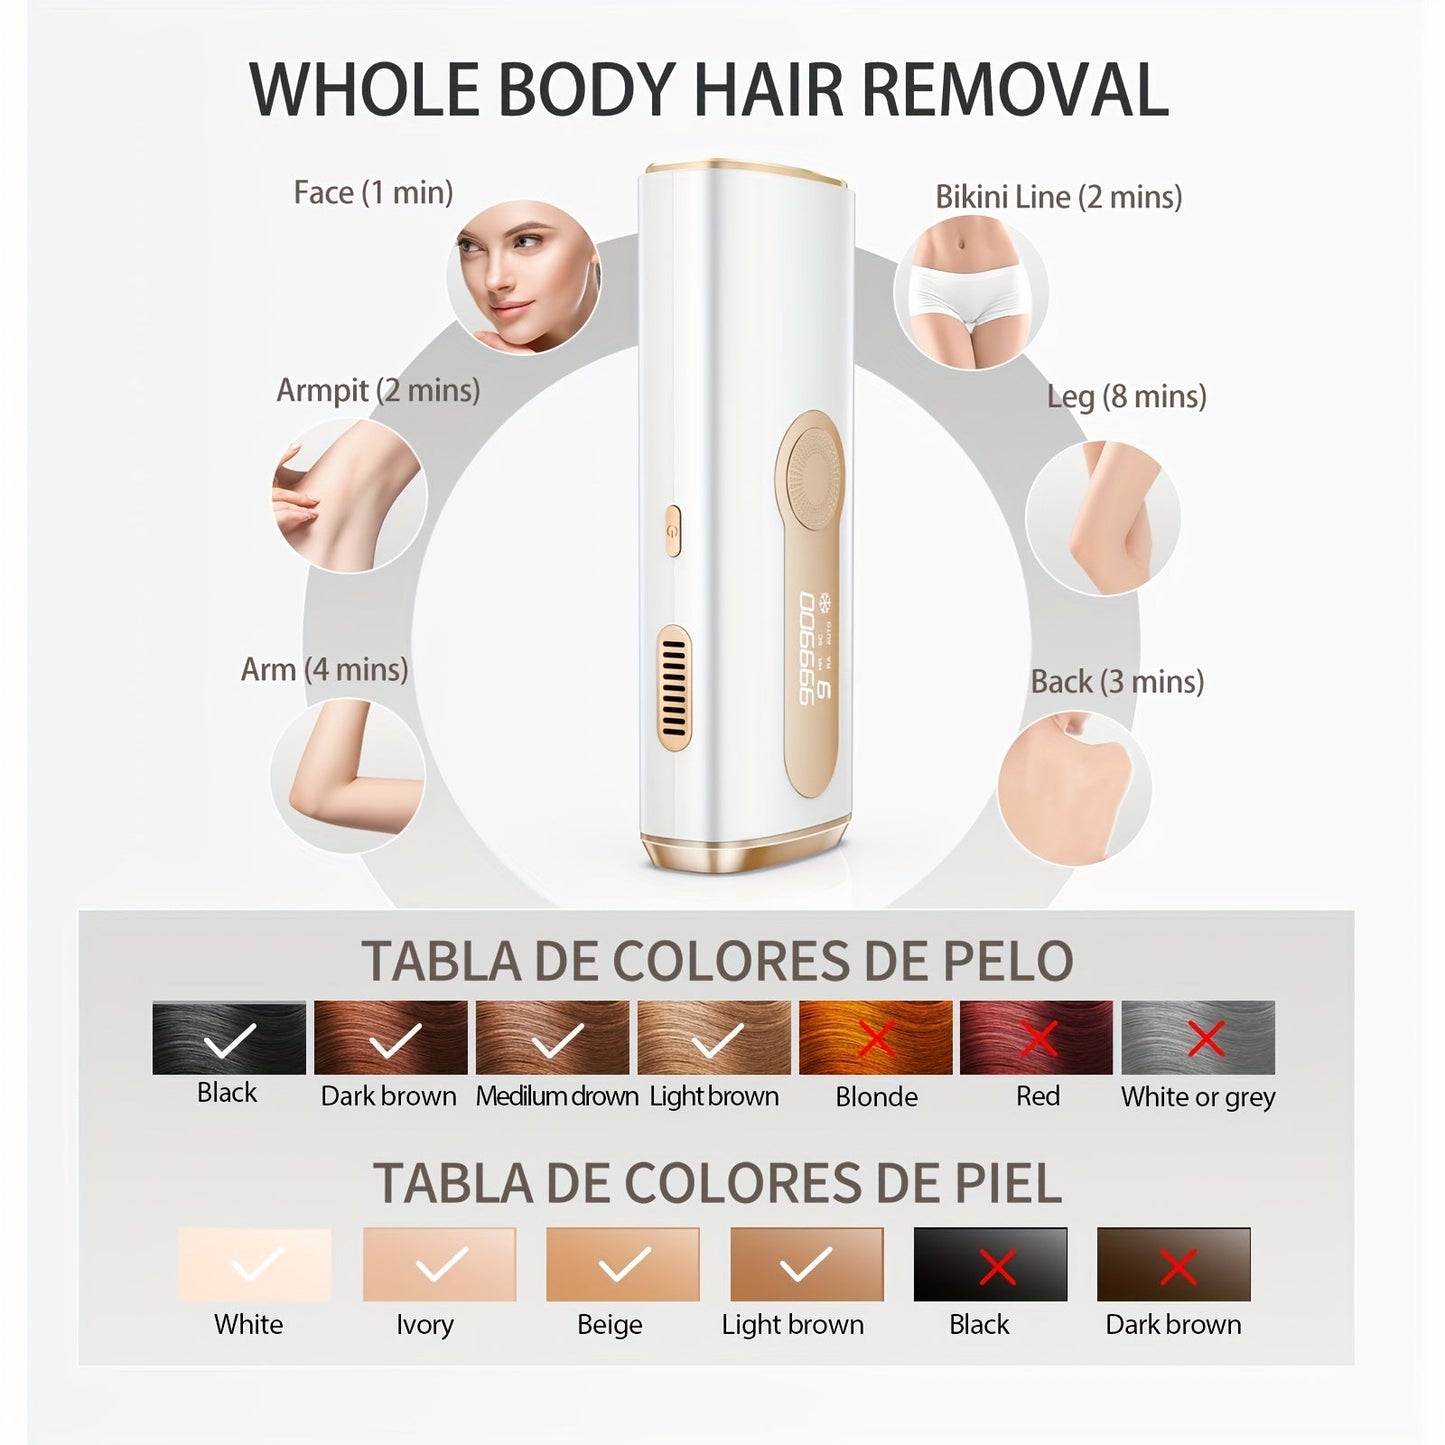 3-in-1 At-Home Permanent Hair Removal Device - IPL Laser Hair Removal with Cooling for Women & Men - 9 Levels Upgrade & 999900 Flashes for Face, Armpit, Arm, Bikini Line, Leg & Whole Body